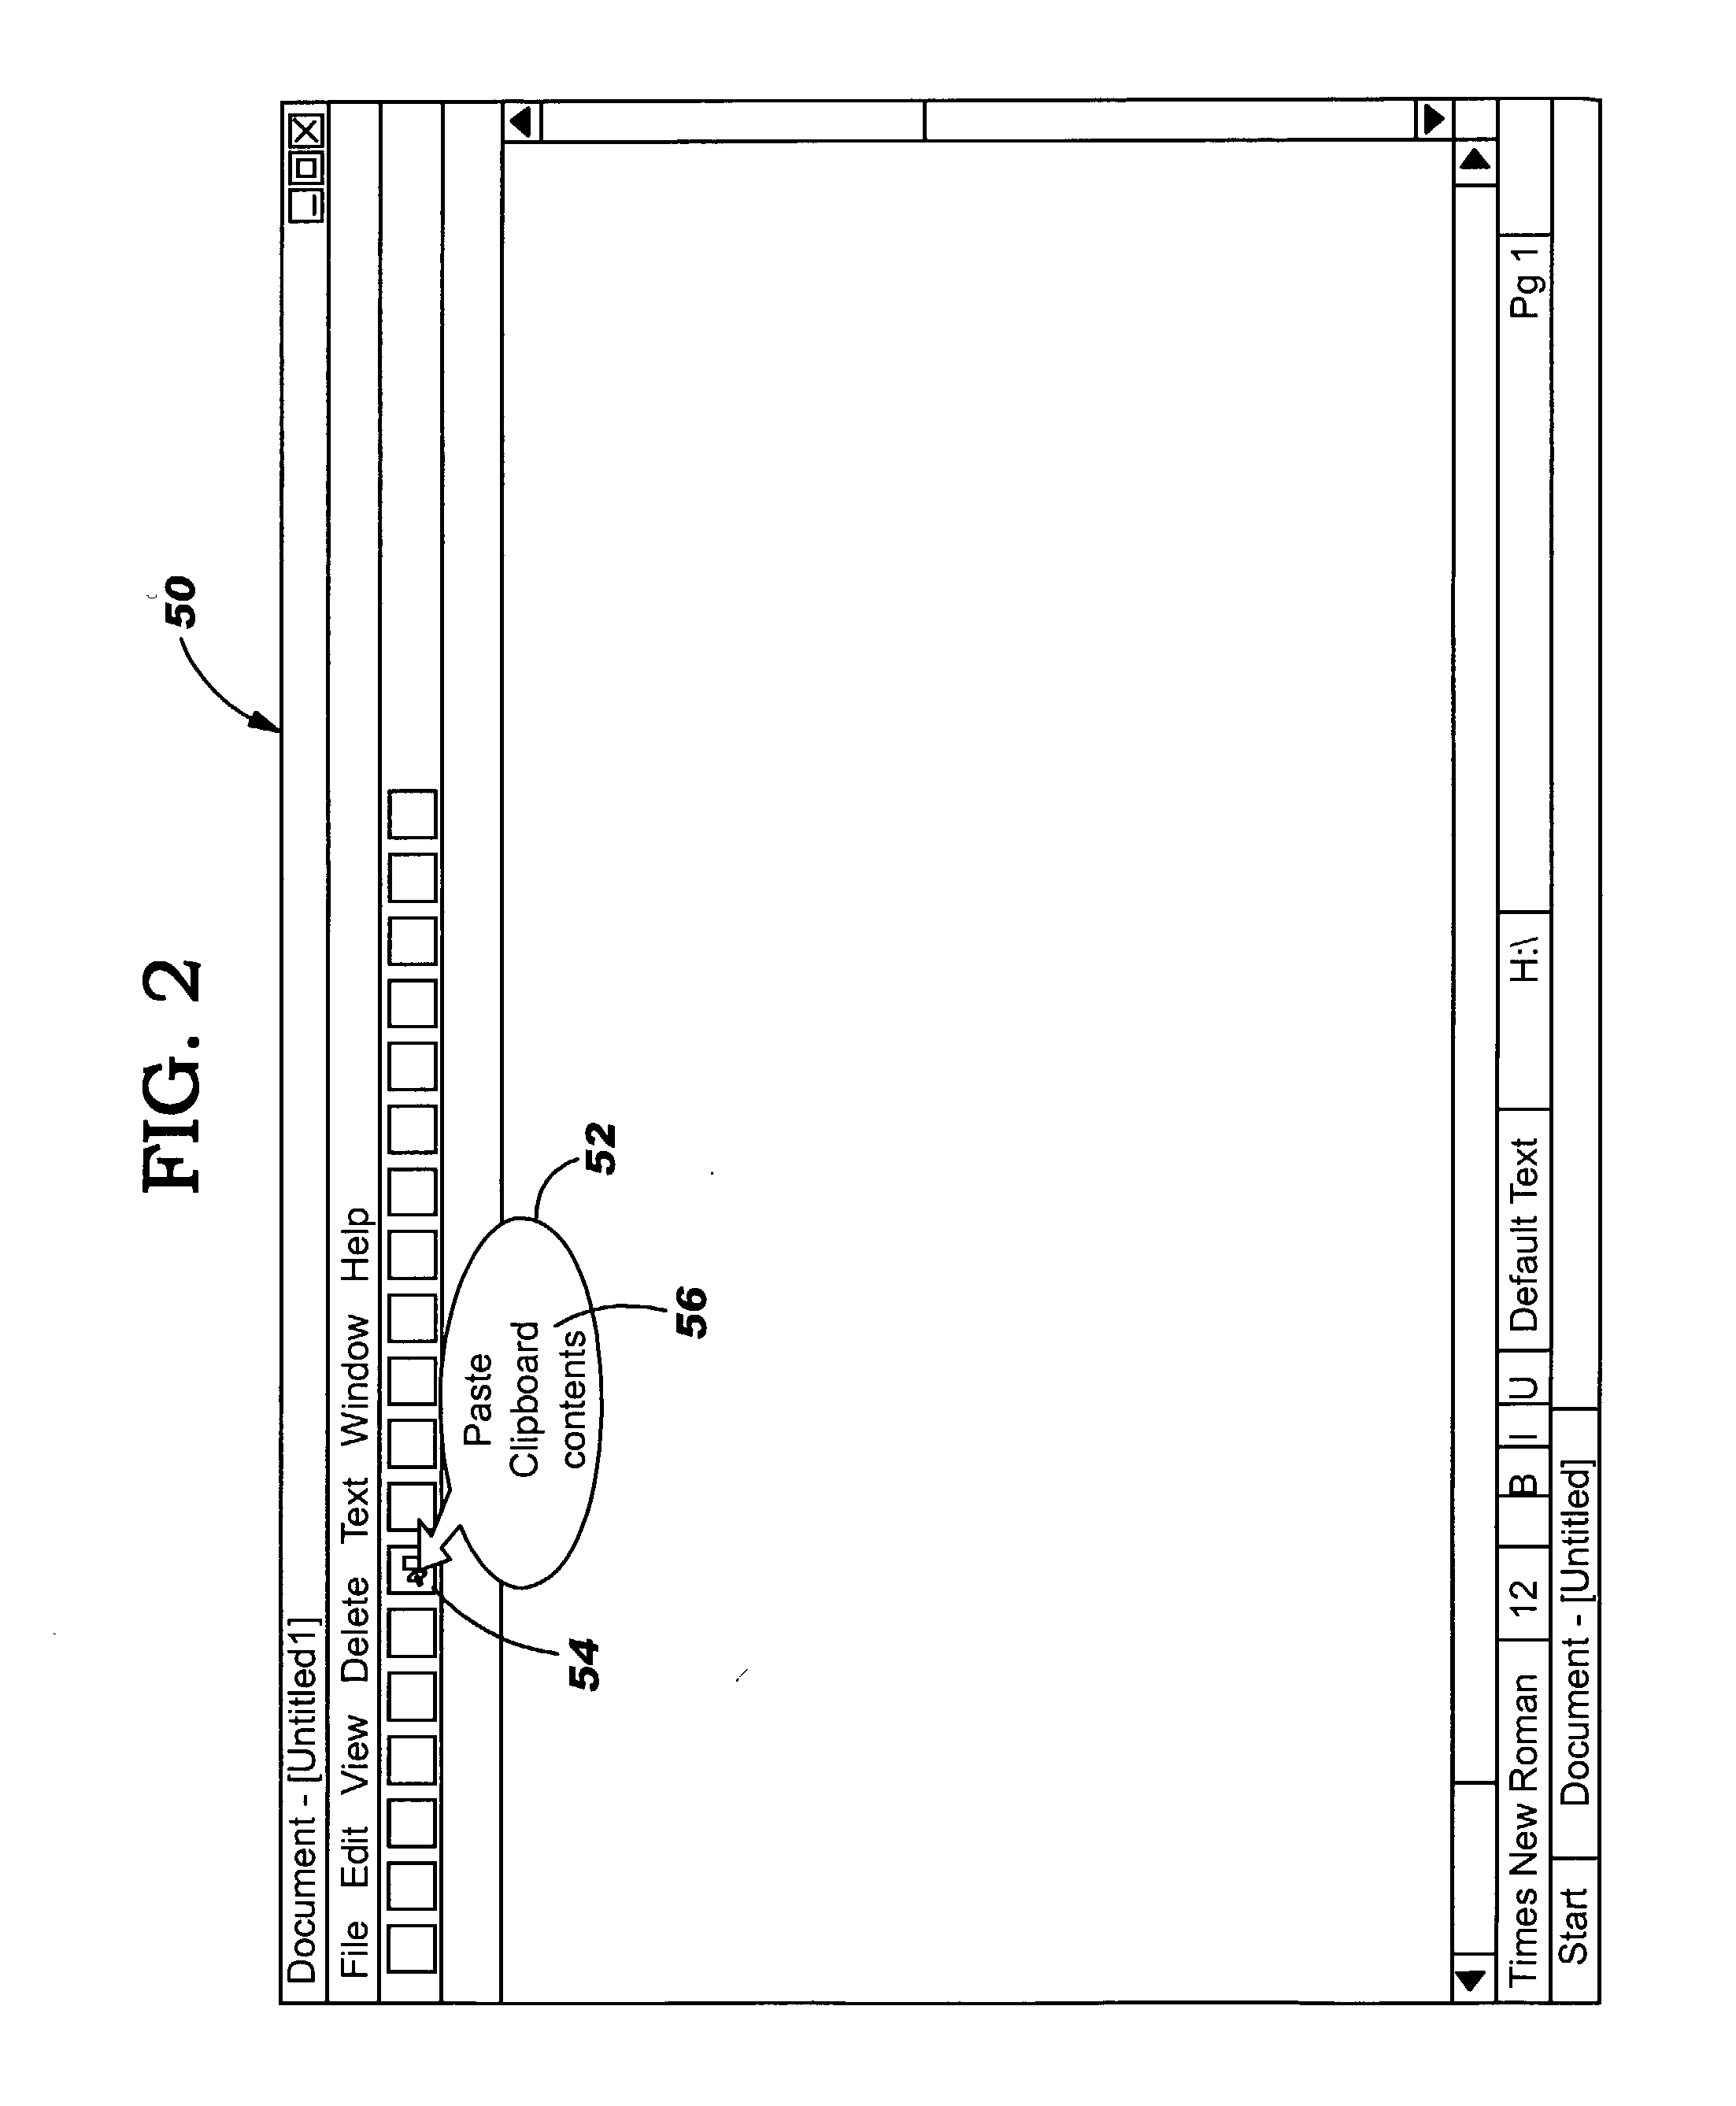 Method, system and program product for displaying a tooltip based on content within the tooltip